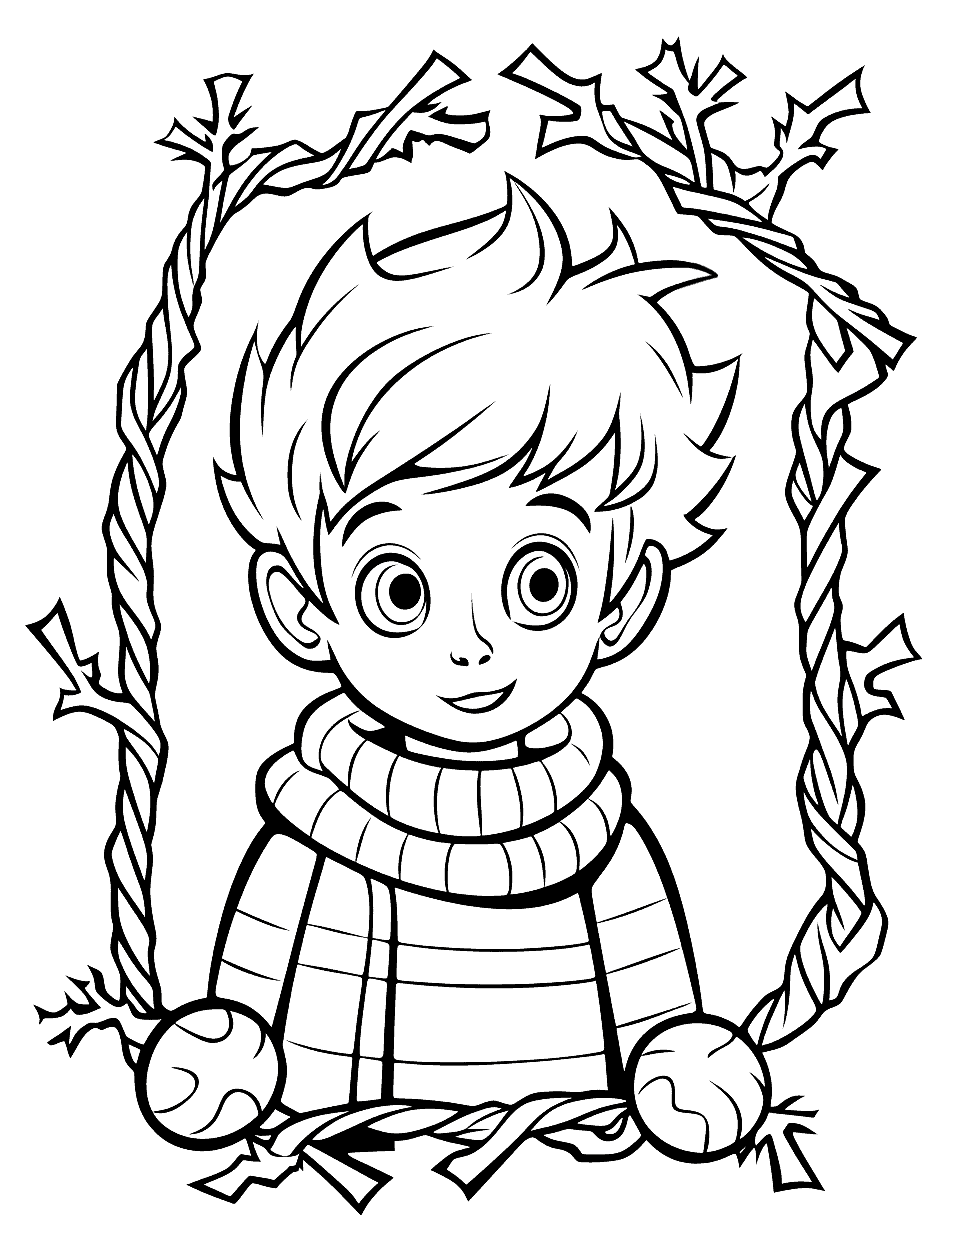 Jack Frost Christmas Coloring Page - A coloring page featuring Jack Frost on a window.